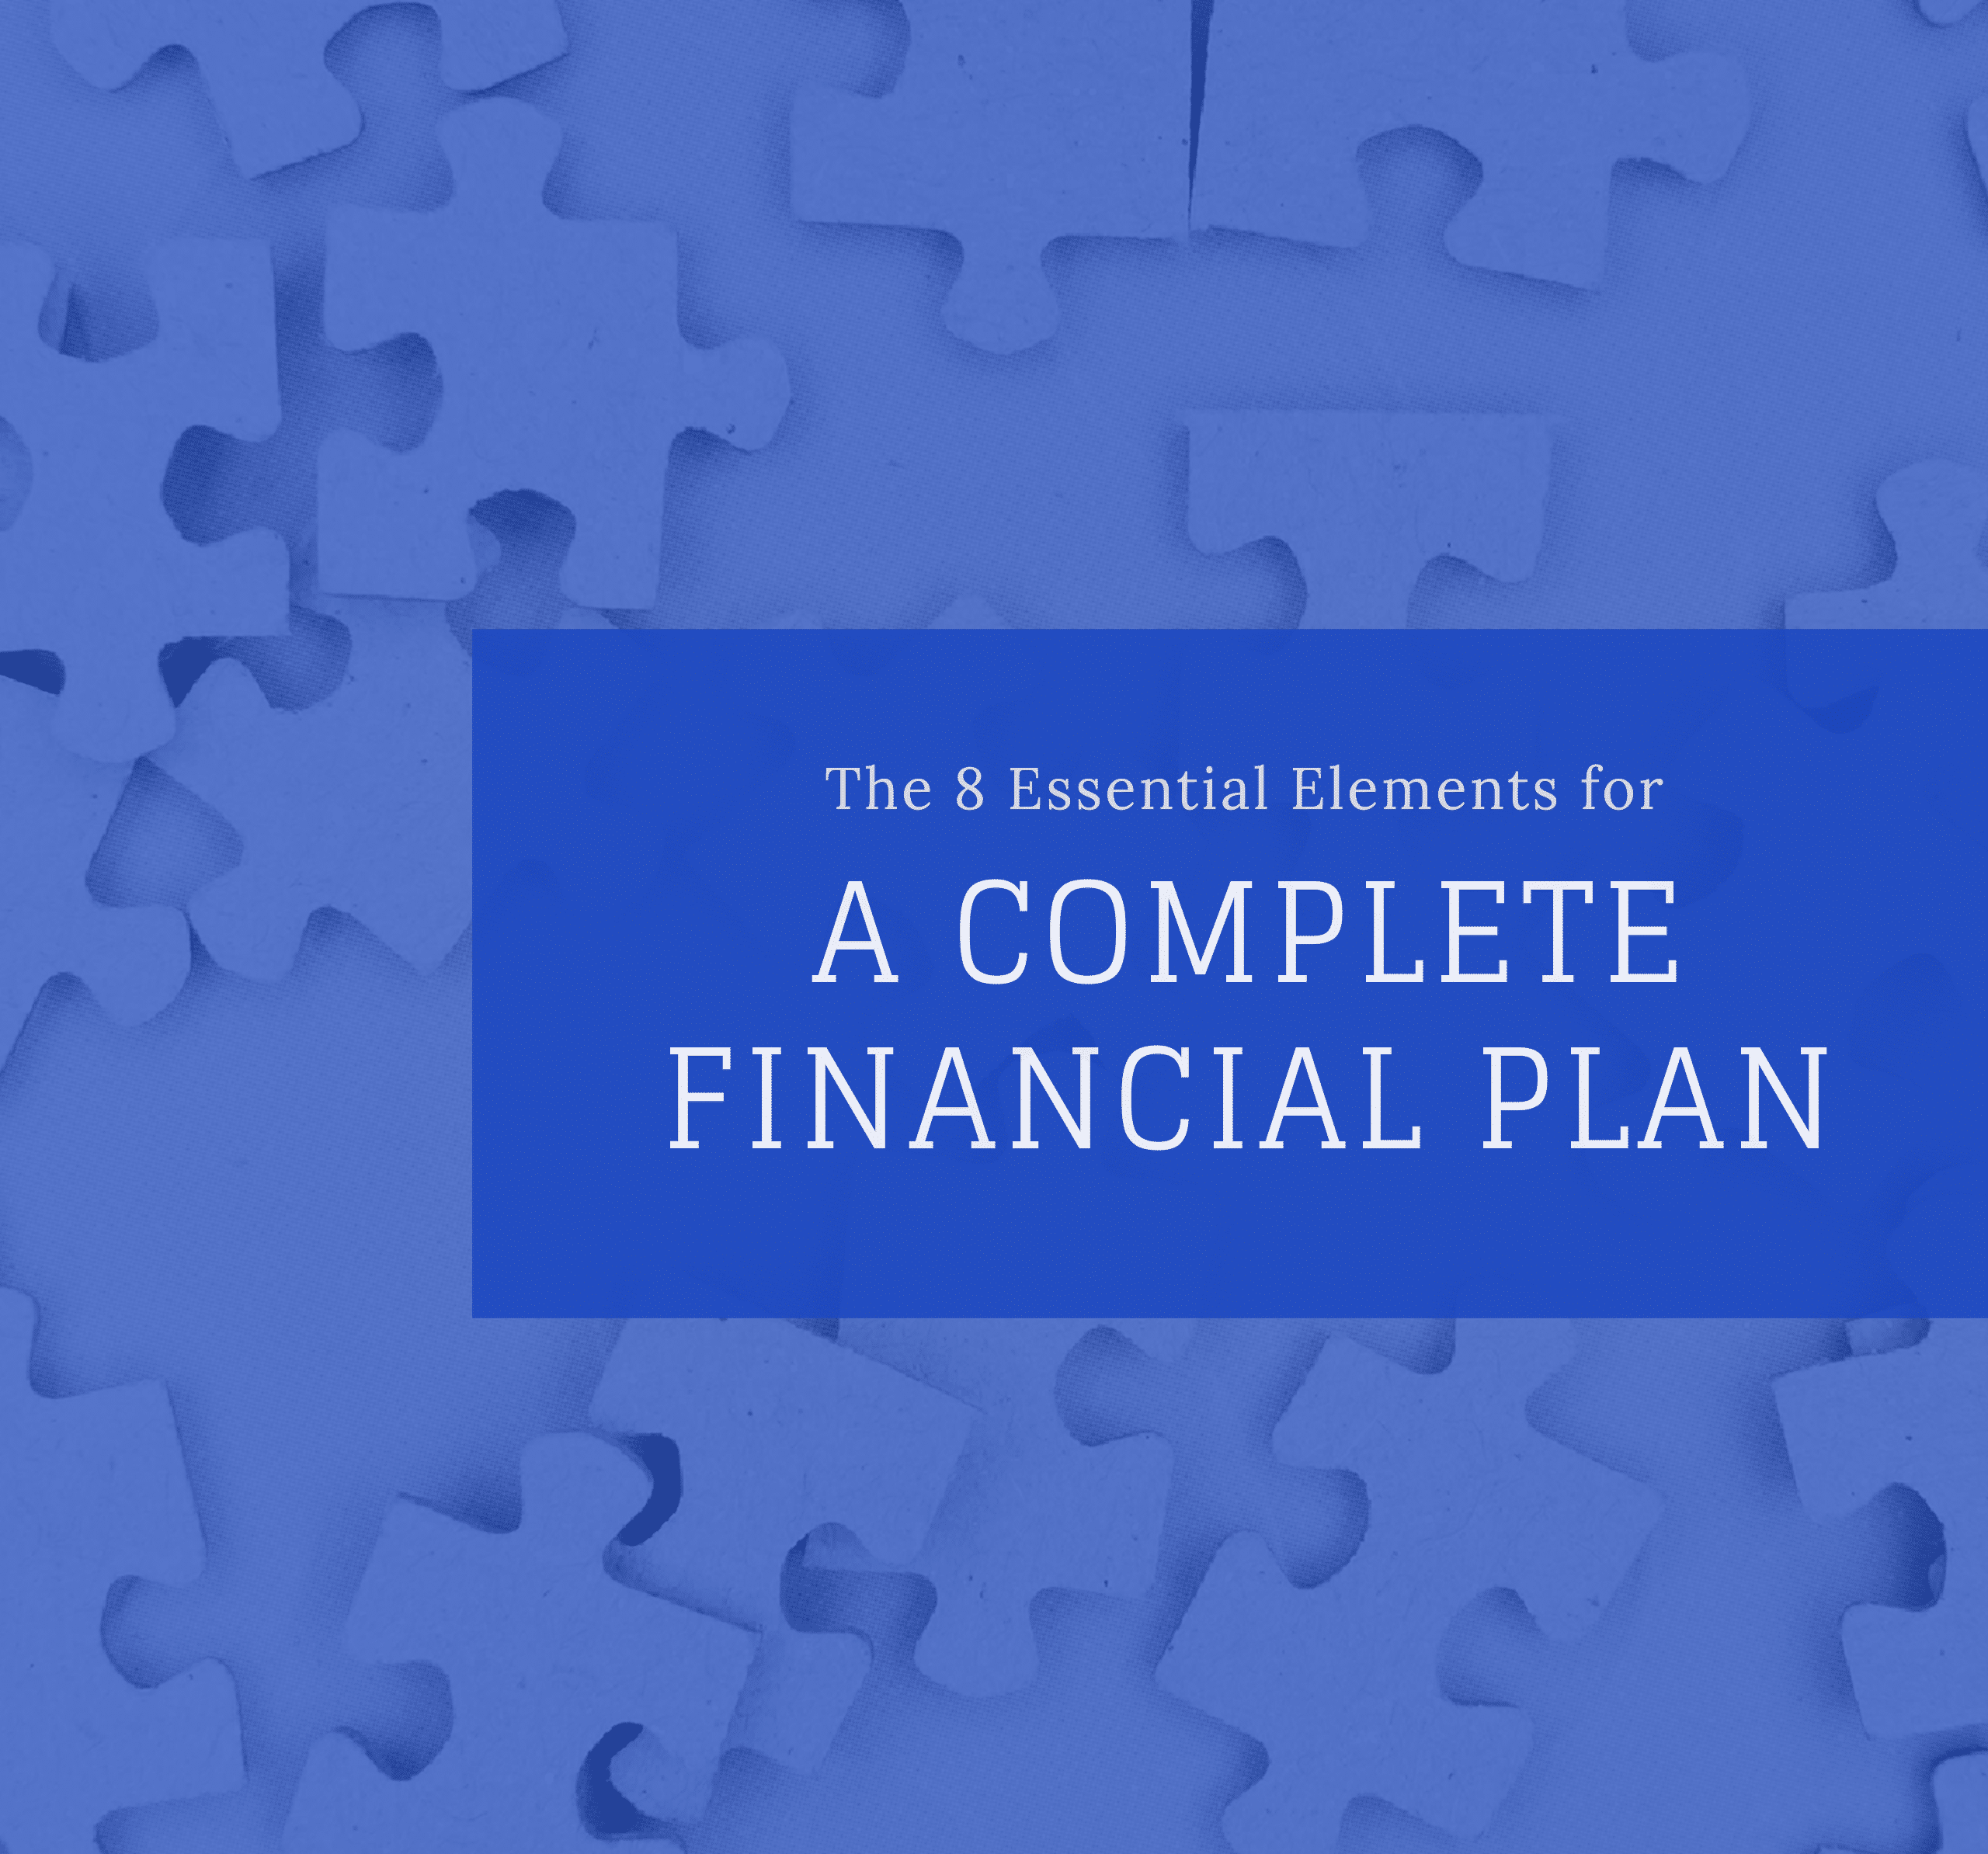 The 8 Essential Elements for a Complete Financial Plan